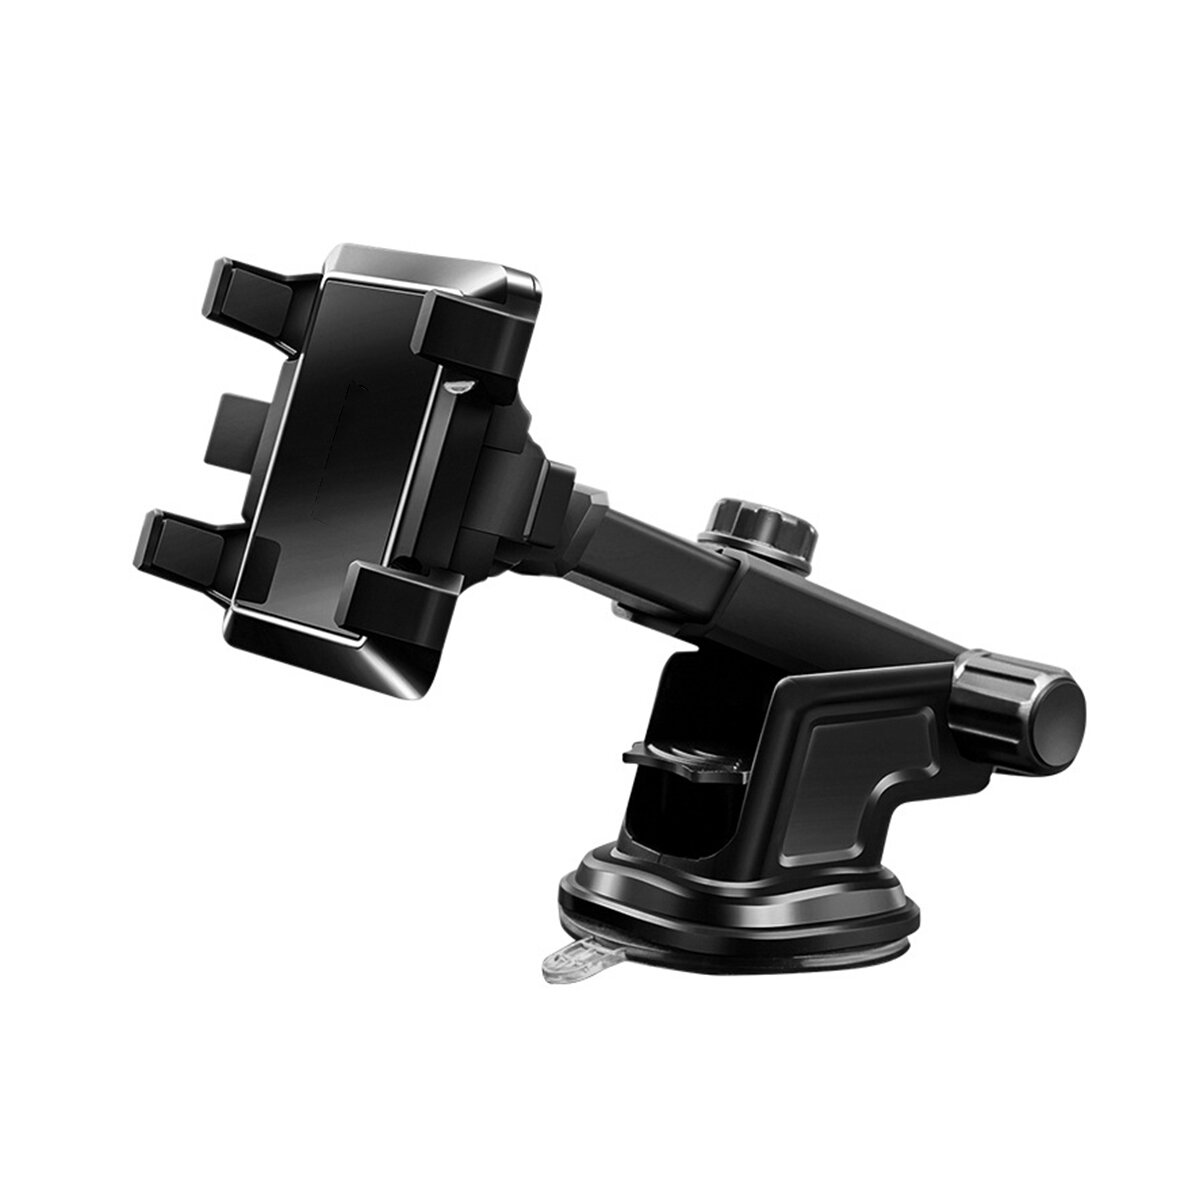 Universal 2-Gear Fixed Lock 17cm Retractable Arm Car Dashboard/ Windshield Mobile Phone Mount Holder Bracket for 3-7 inc